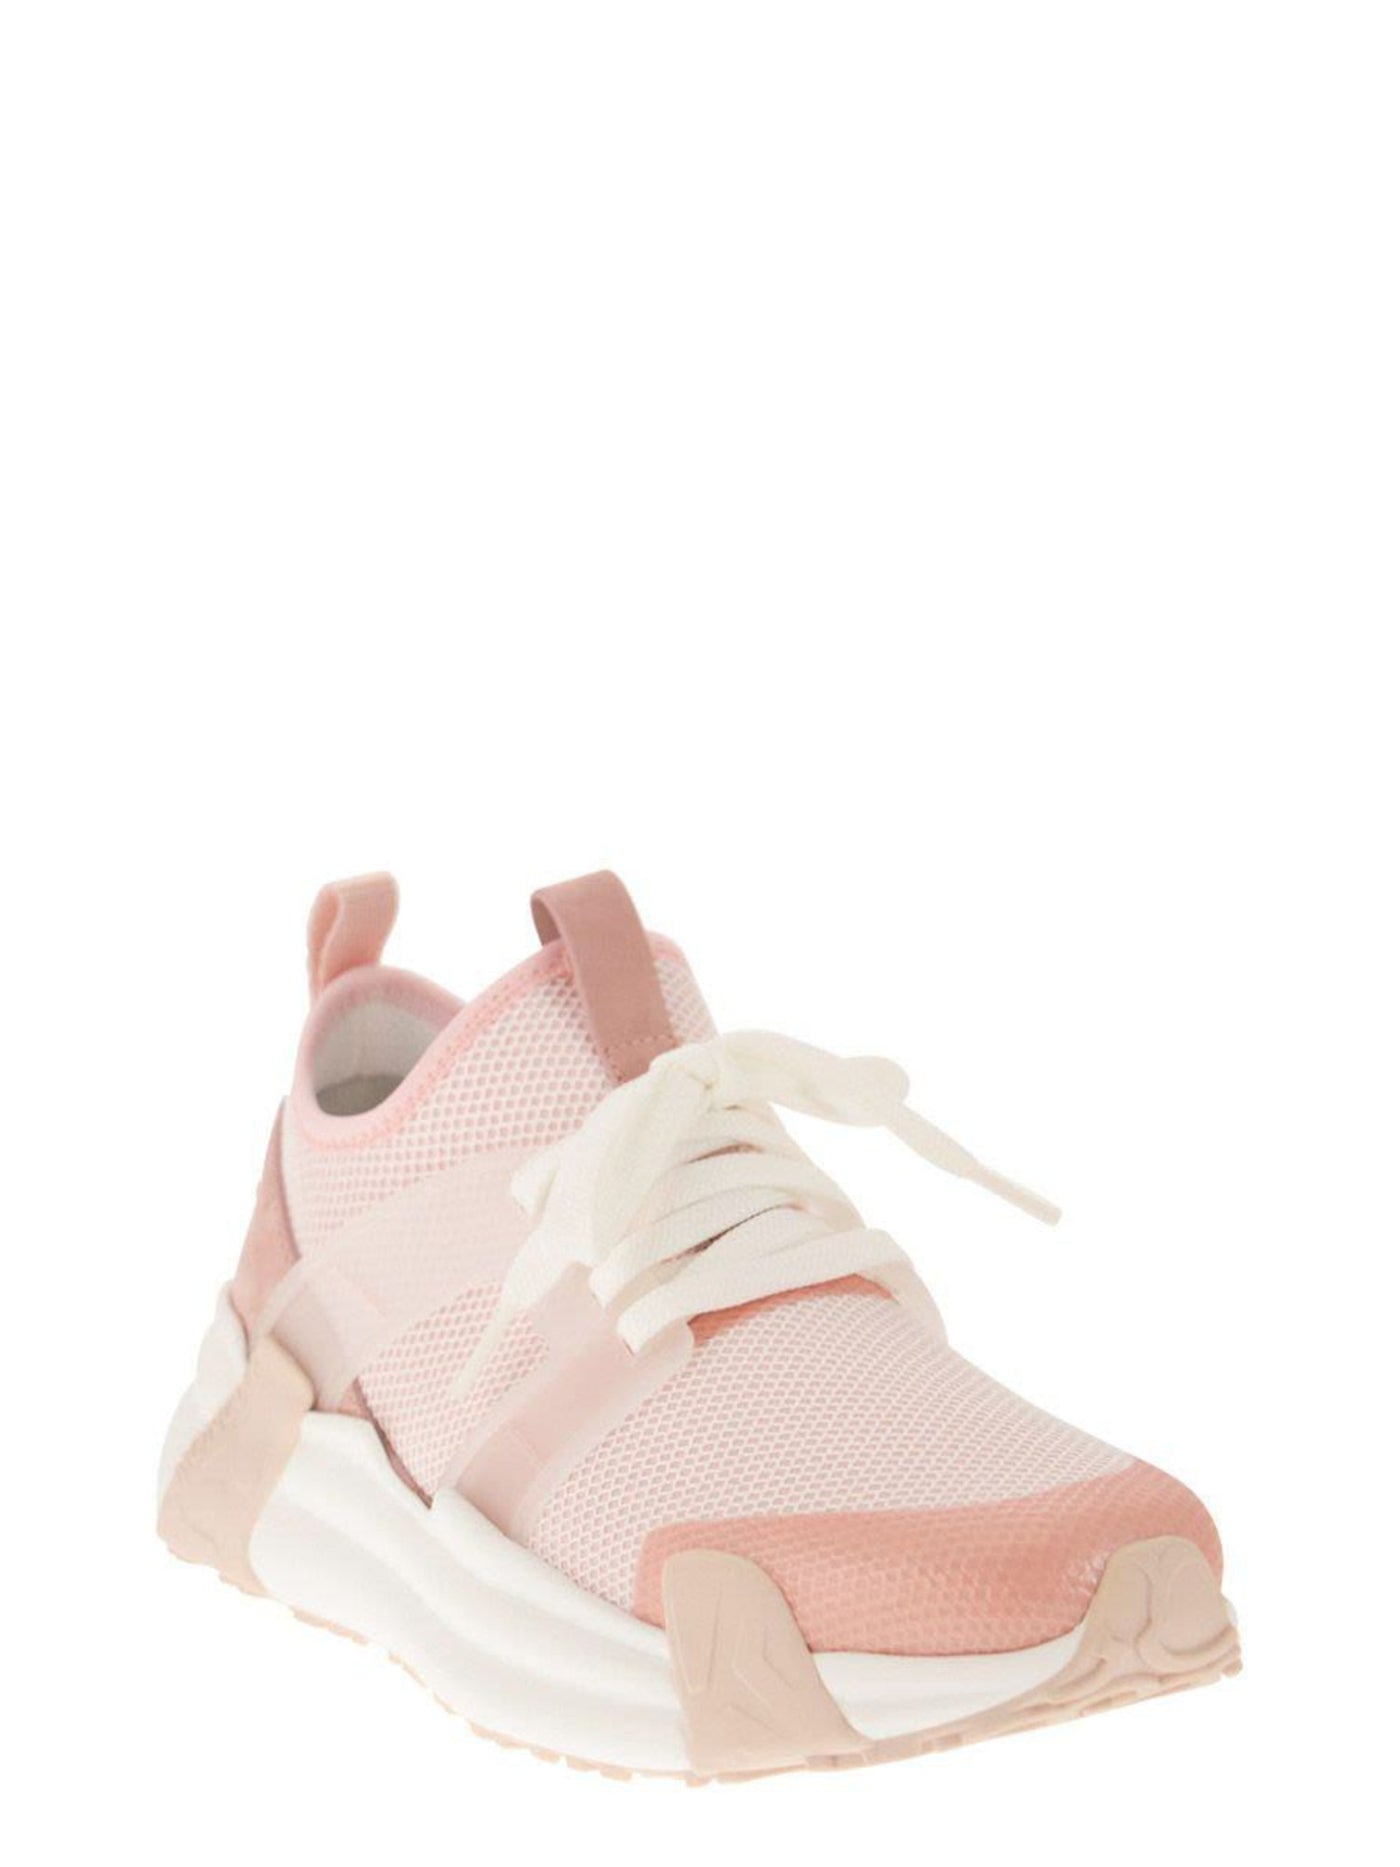 MONCLER Womens Pink Pull Tab Stretch Removable Insole Lunarove Round Toe Wedge Lace-Up Leather Athletic Sneakers 38